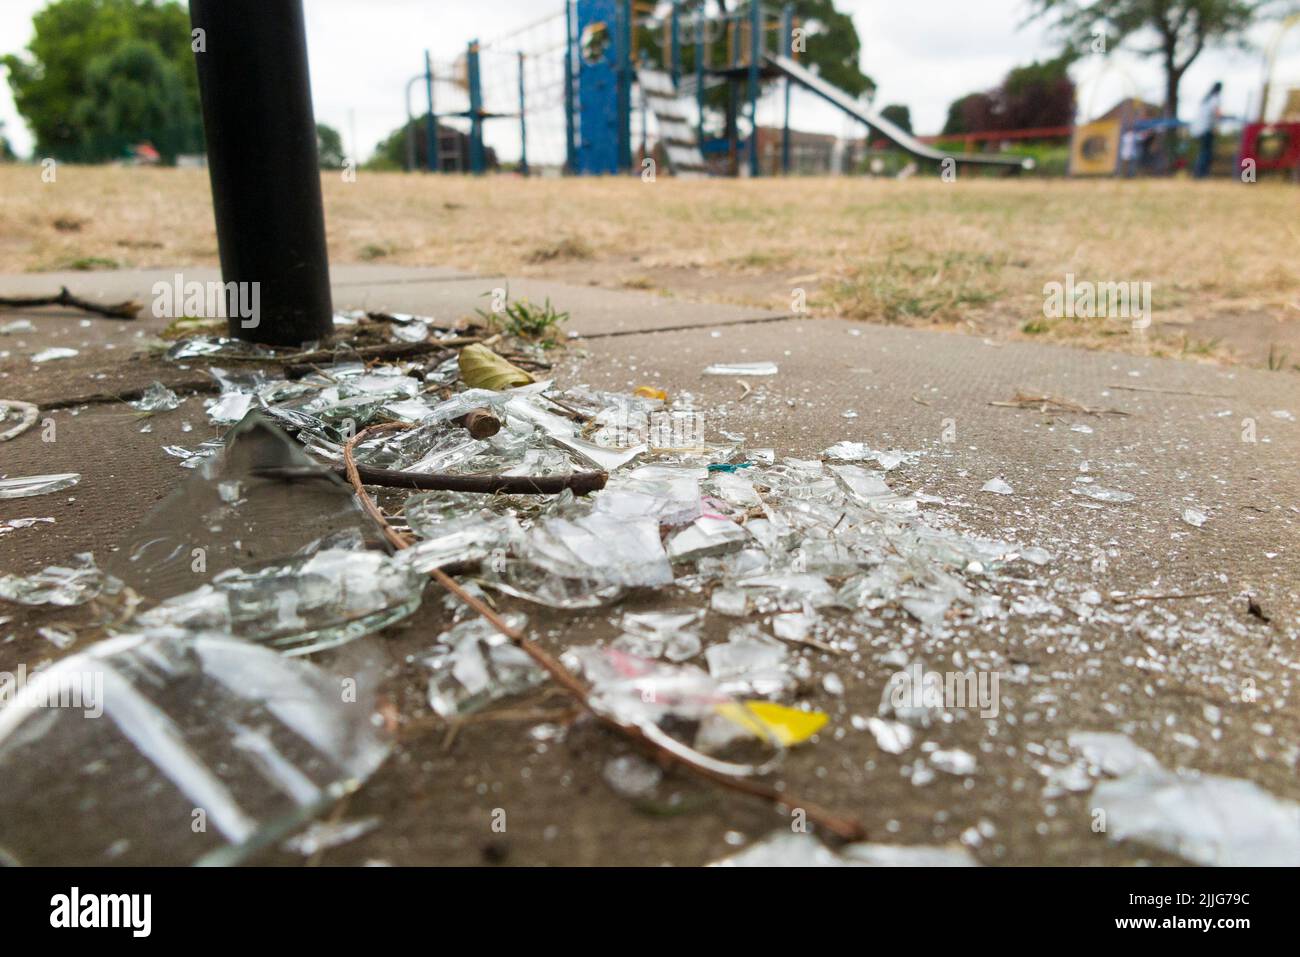 Broken glass bottle, left by vandal, in a children's child's playground. The sharp edges could easily severely cut a child. Twickenham. London. UK. (131) Stock Photo